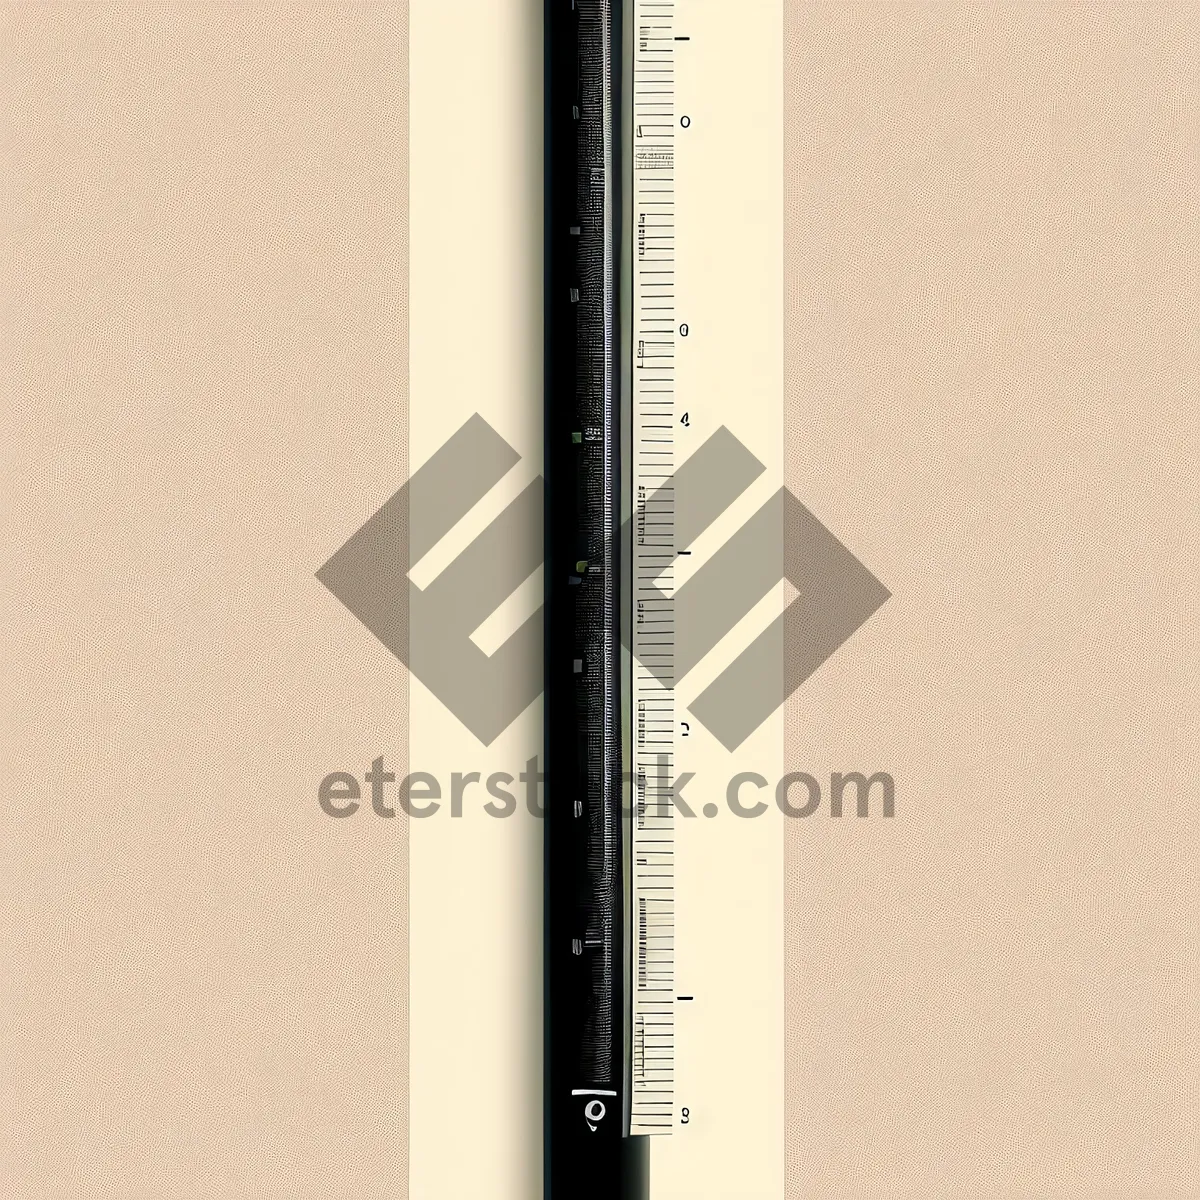 Picture of Precision Measurement Tool: Ruler for Accurate Lengths